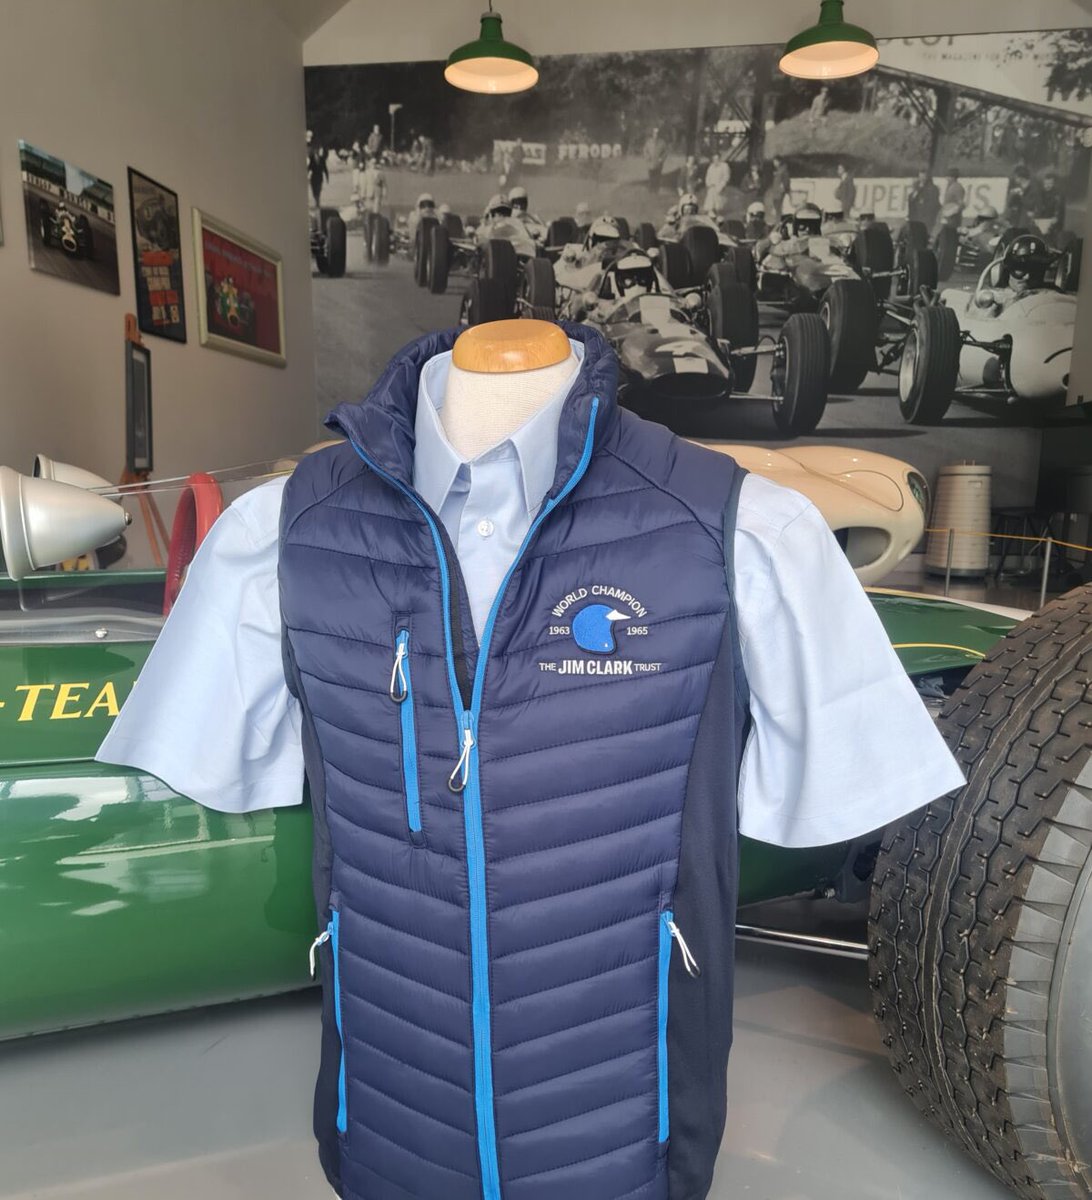 With Spring fast approaching The Jim Clark Trust Bodywarmer is the perfect buy. The Jim Clark Trust Bodywarmer features new Jim Clark Trust logo with World Champion 1963 and 1965 Navy blue representing Jim’s iconic racing helmet with light blue trim. jimclarktrust.com/product/jct-bo…